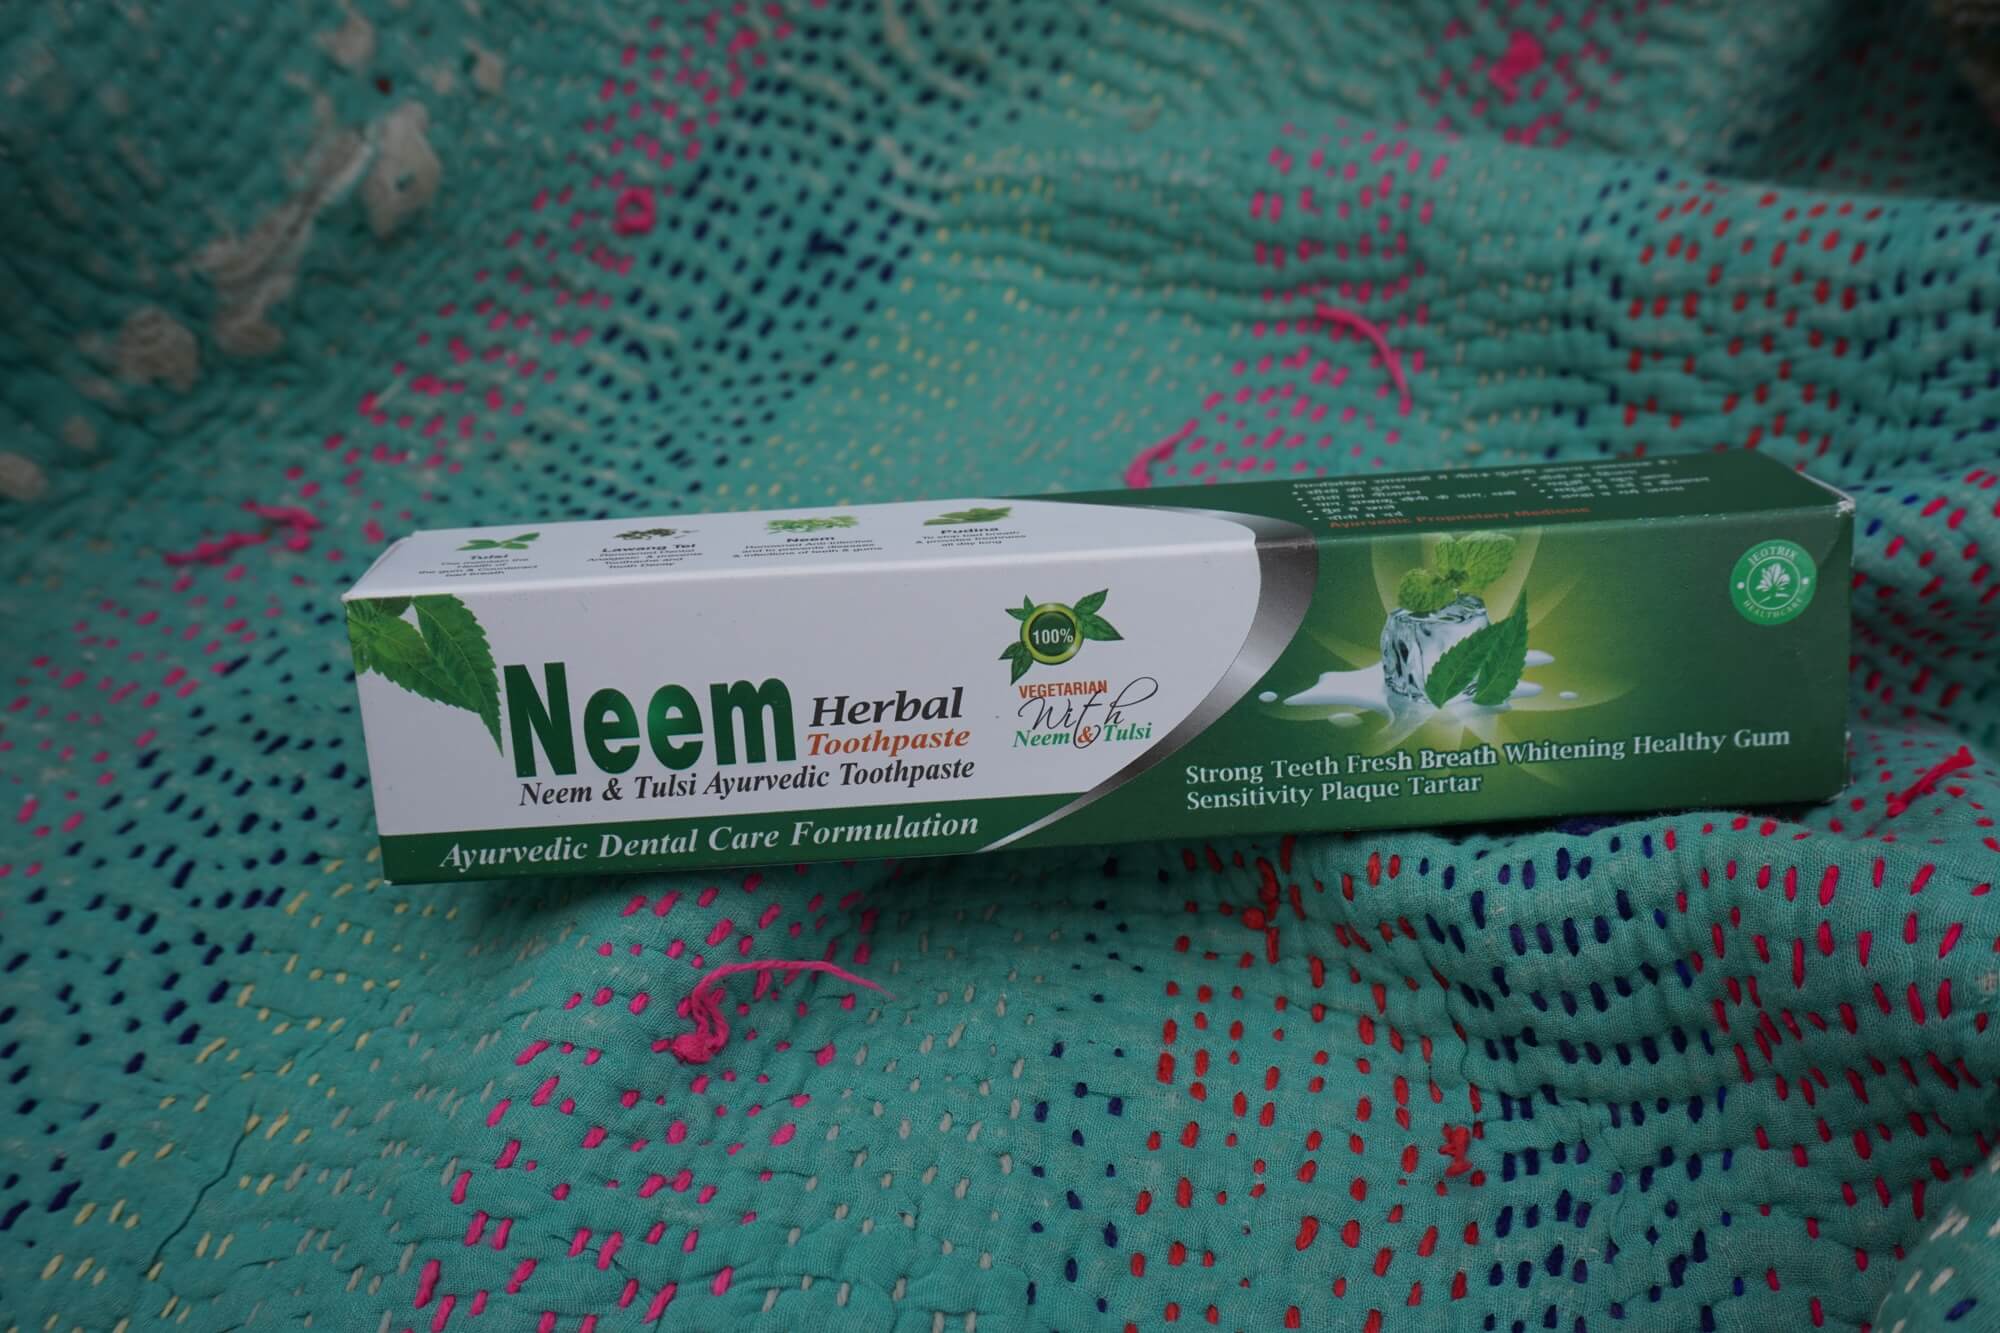 Best ayurvedic souvenirs in India featuring neem toothpaste